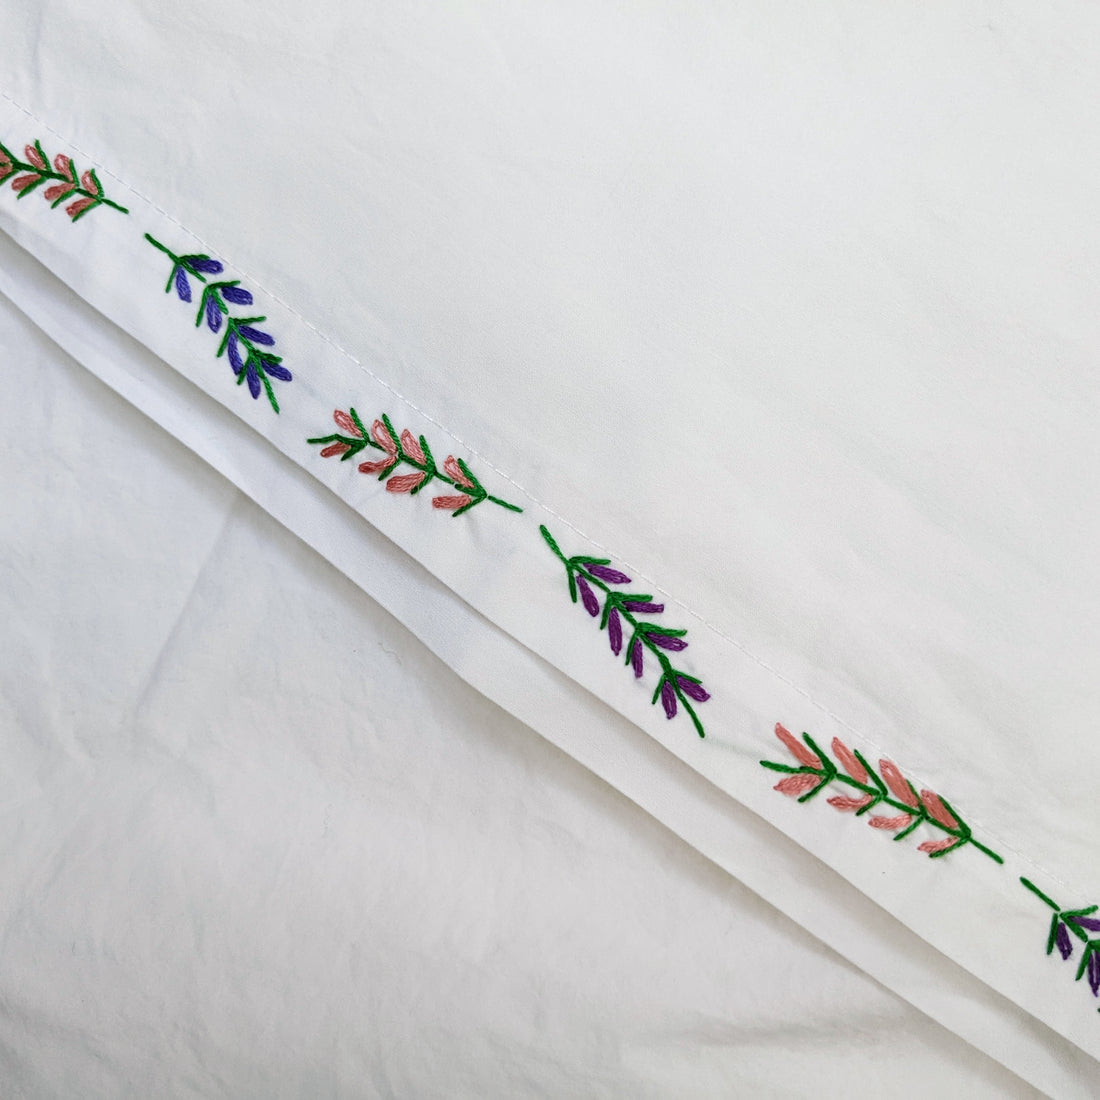 Hand Embroidered Pillowcase - ComfyNeck Extra Large